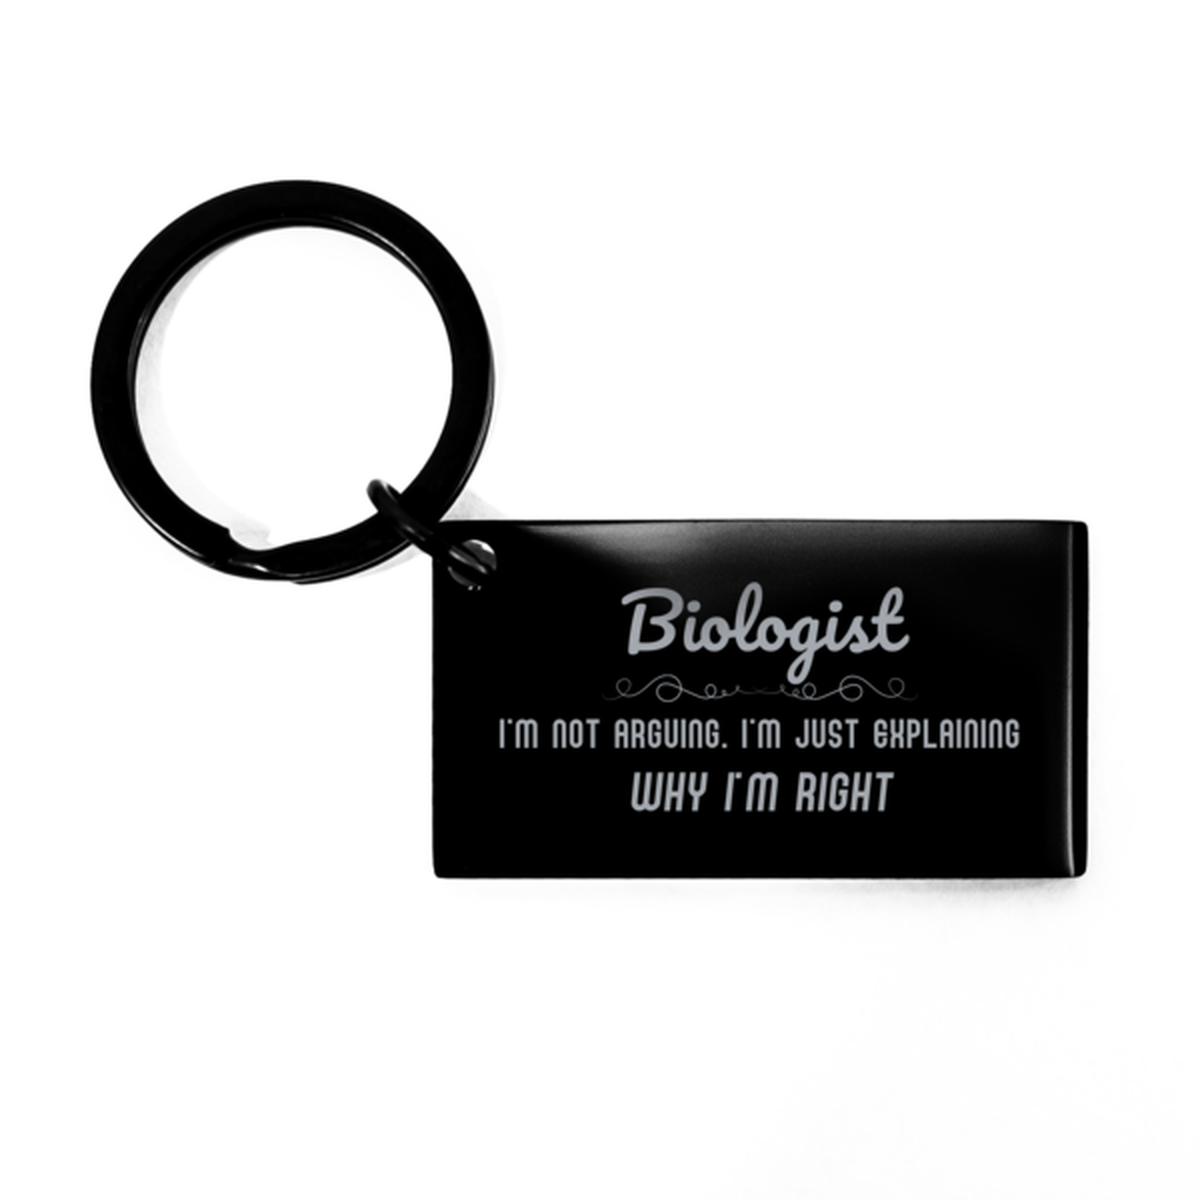 Biologist I'm not Arguing. I'm Just Explaining Why I'm RIGHT Keychain, Funny Saying Quote Biologist Gifts For Biologist Graduation Birthday Christmas Gifts for Men Women Coworker